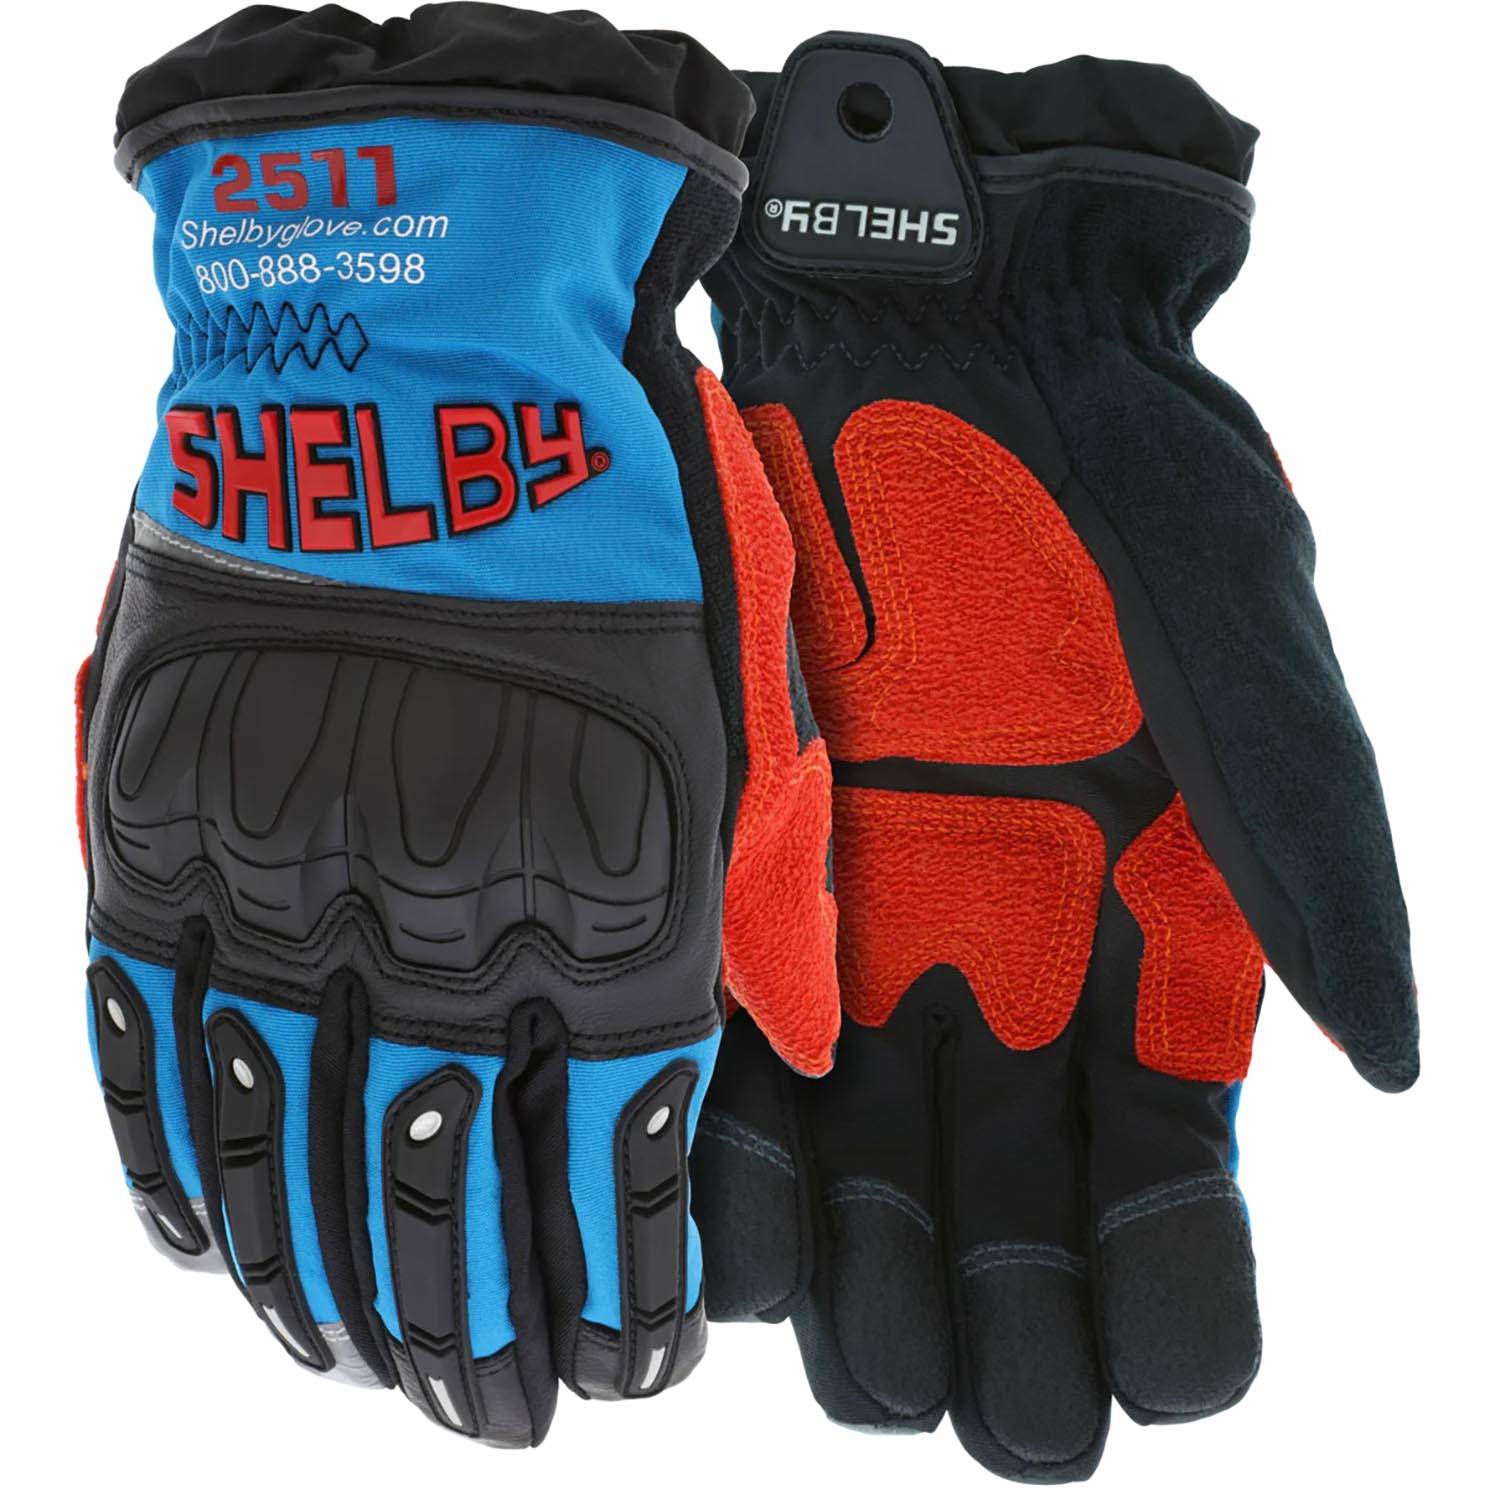 Shelby Gloves Xtrication Waterproof Barrier Rescue Gloves